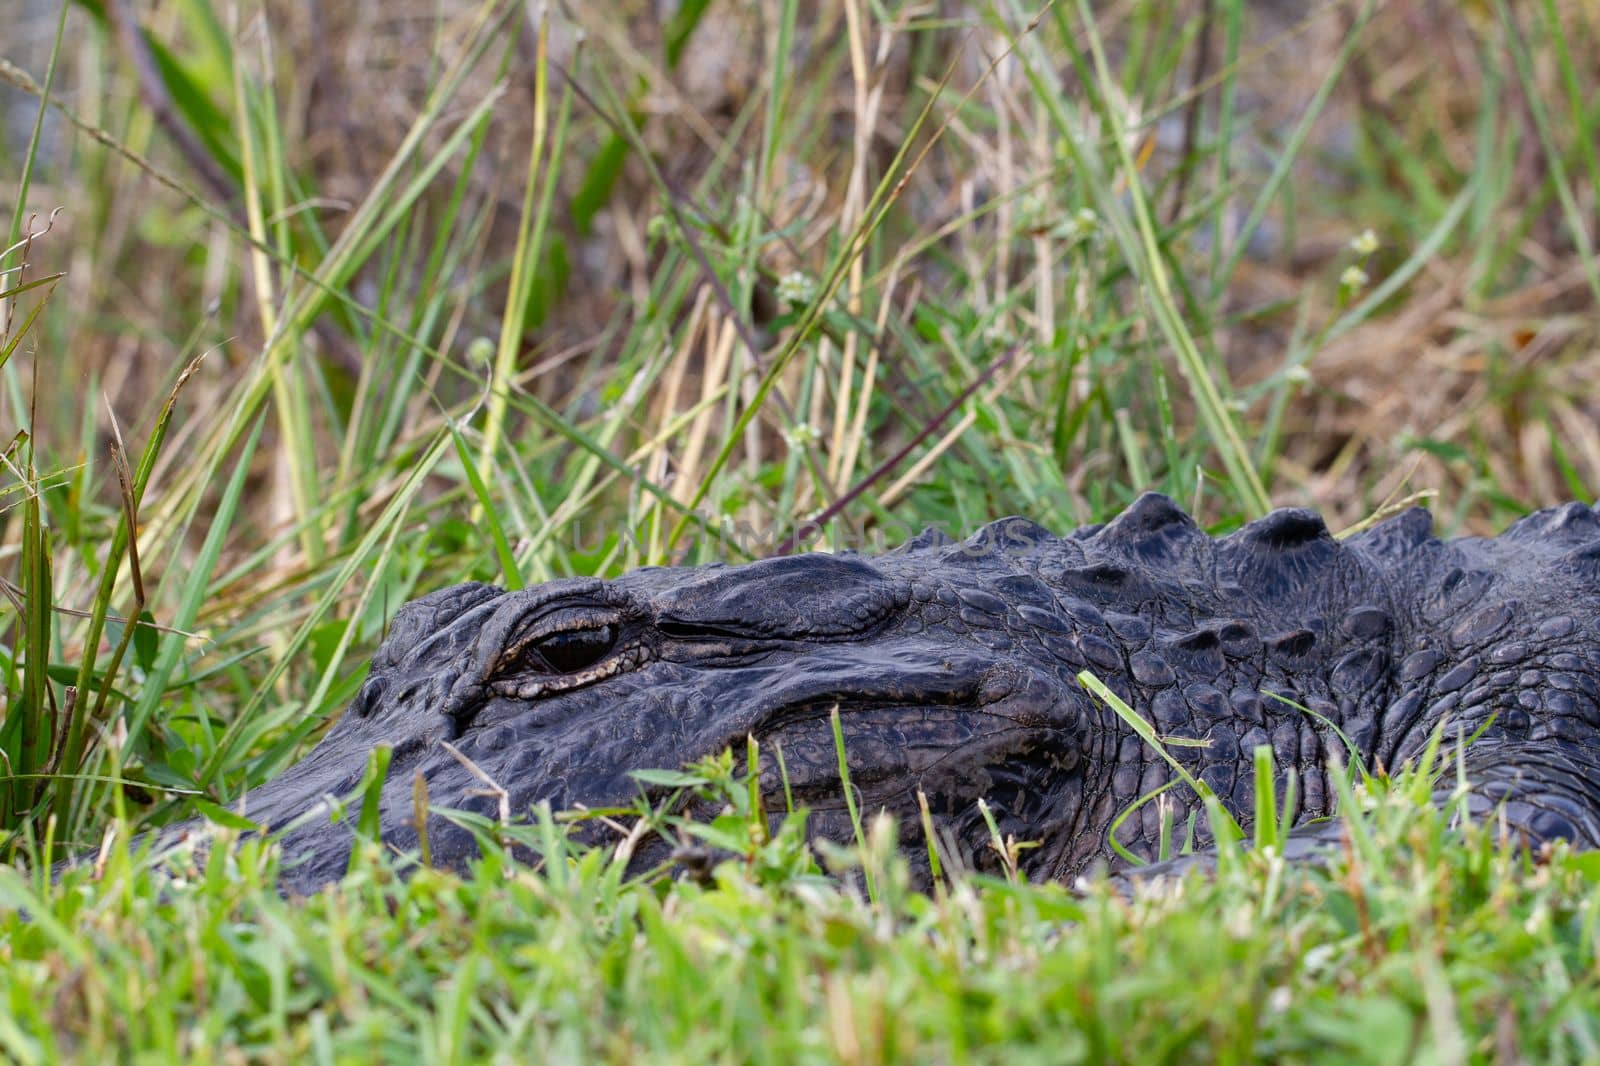 Close-up of an American alligator hiding in grass and sunning with eyes open by Granchinho